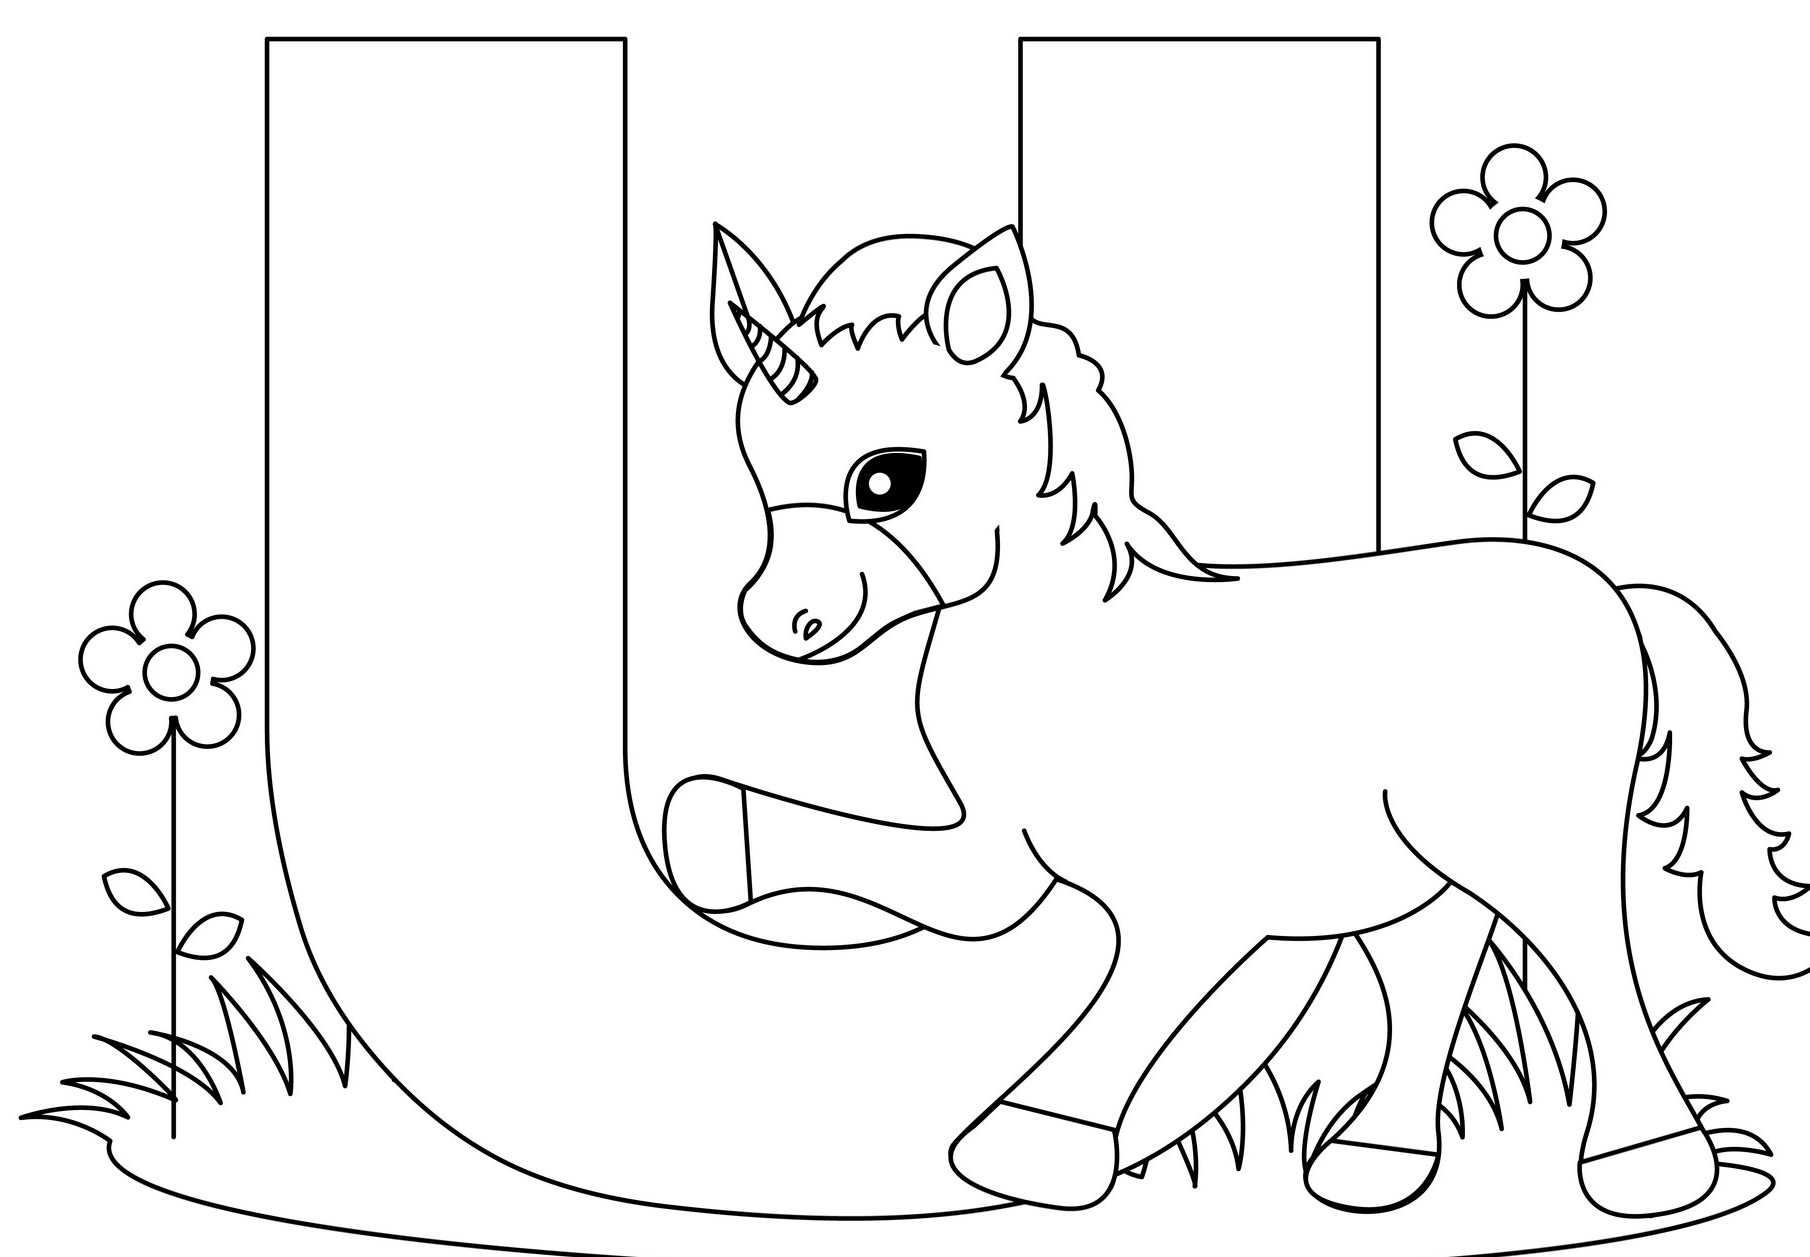 U for Unicorn Coloring Page for Kids